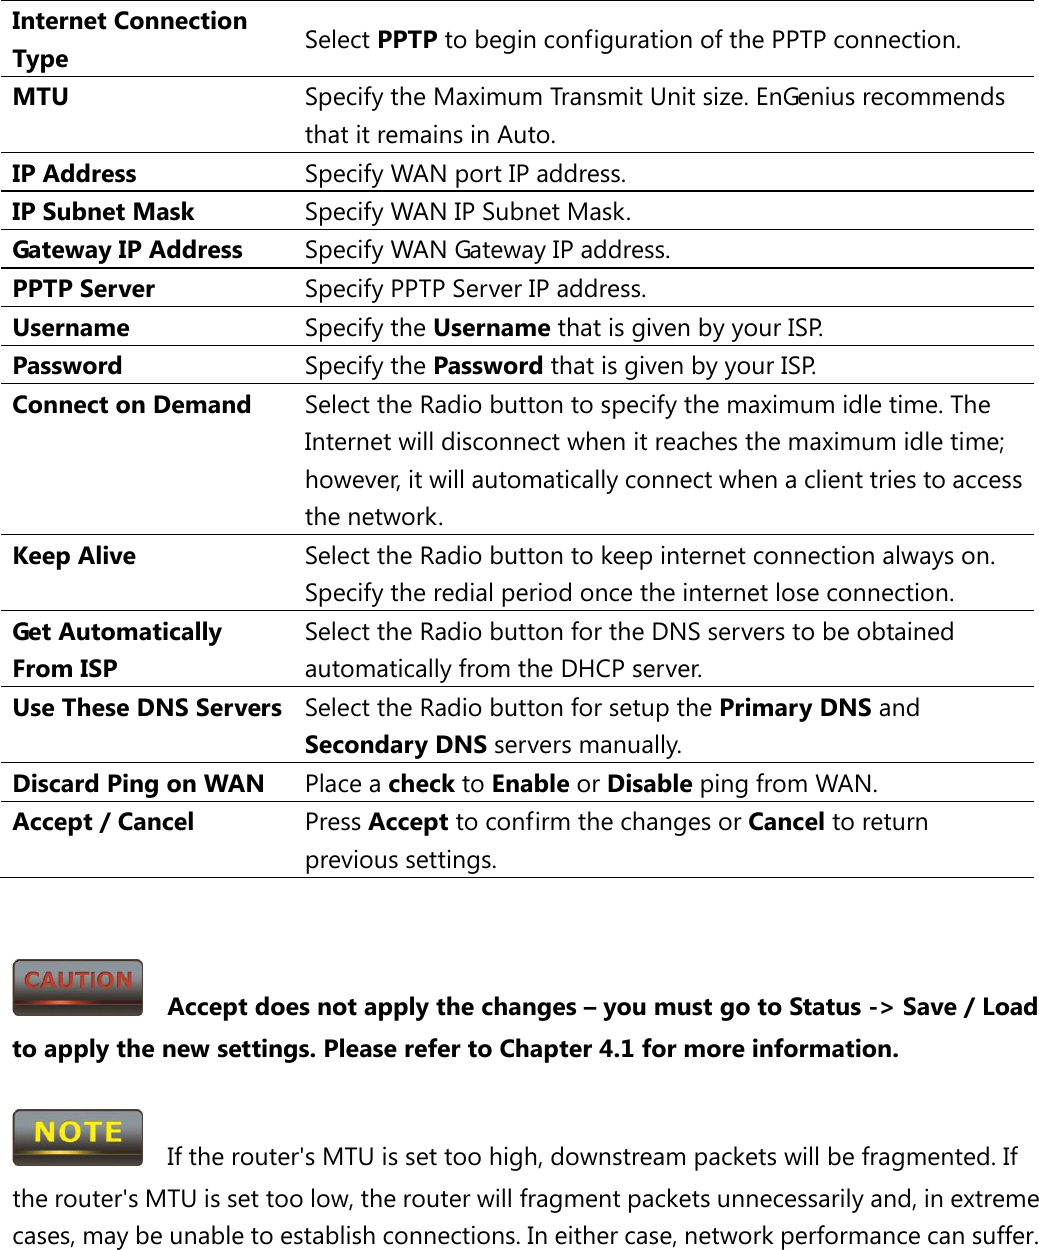 Internet Connection Type Select PPTP to begin configuration of the PPTP connection. MTU Specify the Maximum Transmit Unit size. EnGenius recommends that it remains in Auto. IP Address Specify WAN port IP address. IP Subnet Mask Specify WAN IP Subnet Mask. Gateway IP Address Specify WAN Gateway IP address. PPTP Server Specify PPTP Server IP address. Username Specify the Username that is given by your ISP. Password  Specify the Password that is given by your ISP. Connect on Demand Select the Radio button to specify the maximum idle time. The Internet will disconnect when it reaches the maximum idle time; however, it will automatically connect when a client tries to access the network. Keep Alive Select the Radio button to keep internet connection always on. Specify the redial period once the internet lose connection. Get Automatically From ISP Select the Radio button for the DNS servers to be obtained automatically from the DHCP server. Use These DNS Servers Select the Radio button for setup the Primary DNS and Secondary DNS servers manually. Discard Ping on WAN Place a check to Enable or Disable ping from WAN. Accept / Cancel Press Accept to confirm the changes or Cancel to return previous settings.     Accept does not apply the changes – you must go to Status -&gt; Save / Load to apply the new settings. Please refer to Chapter 4.1 for more information.    If the router&apos;s MTU is set too high, downstream packets will be fragmented. If the router&apos;s MTU is set too low, the router will fragment packets unnecessarily and, in extreme cases, may be unable to establish connections. In either case, network performance can suffer. 